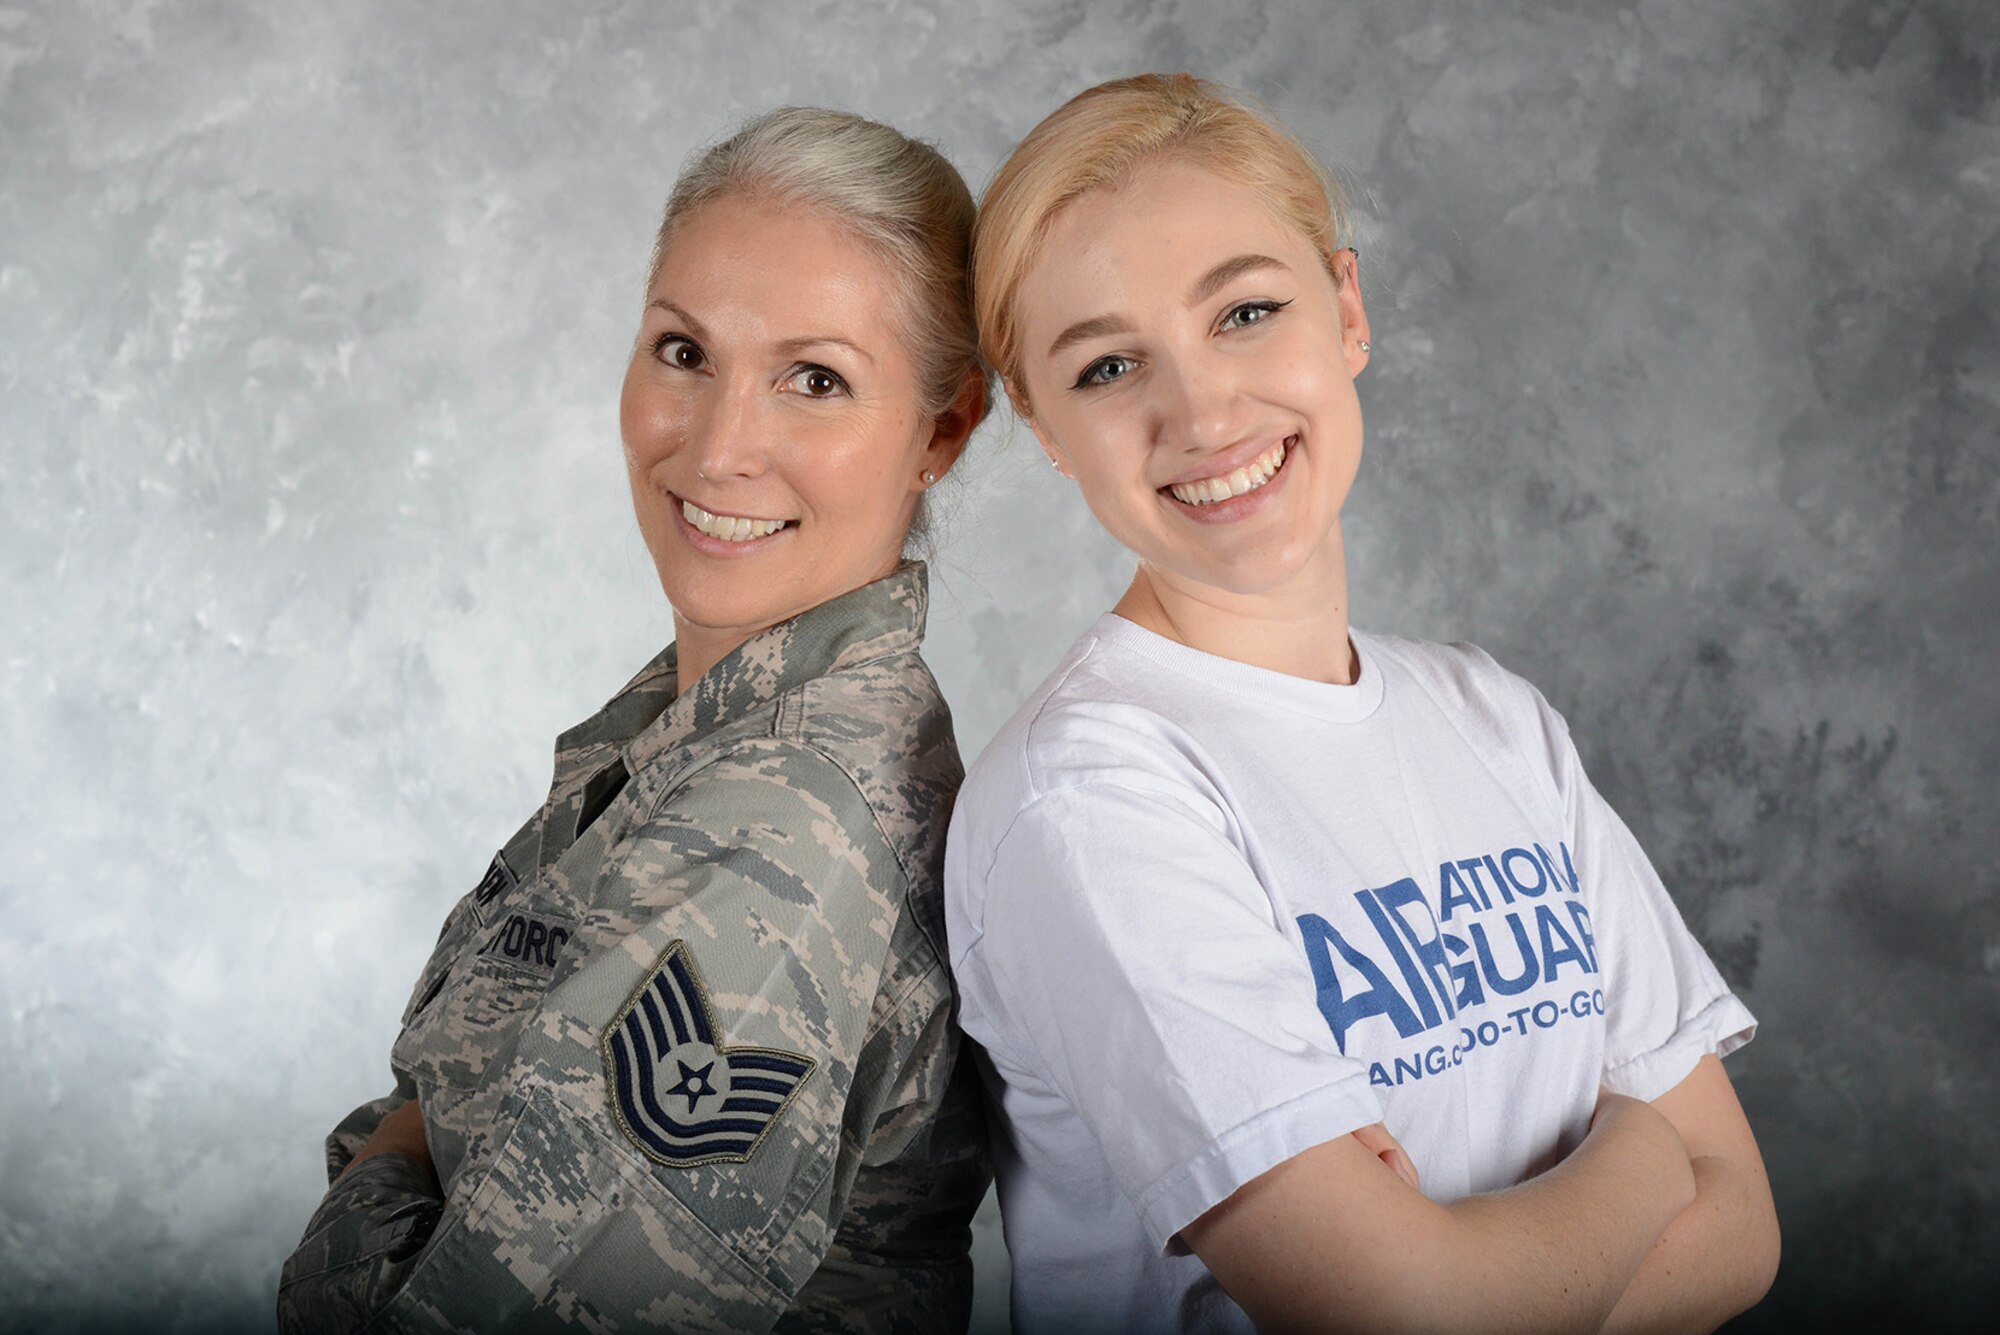 Tech. Sgt. Lisa Menken, a contract specialist with the 136th Mission Support Group, Texas Air National Guard, poses with her daughter Charrisa Menken April 29, 2018 in the 136th Airlift Wing Public Affairs studio at Naval Air Station Fort Worth Joint Reserve Base, Texas.